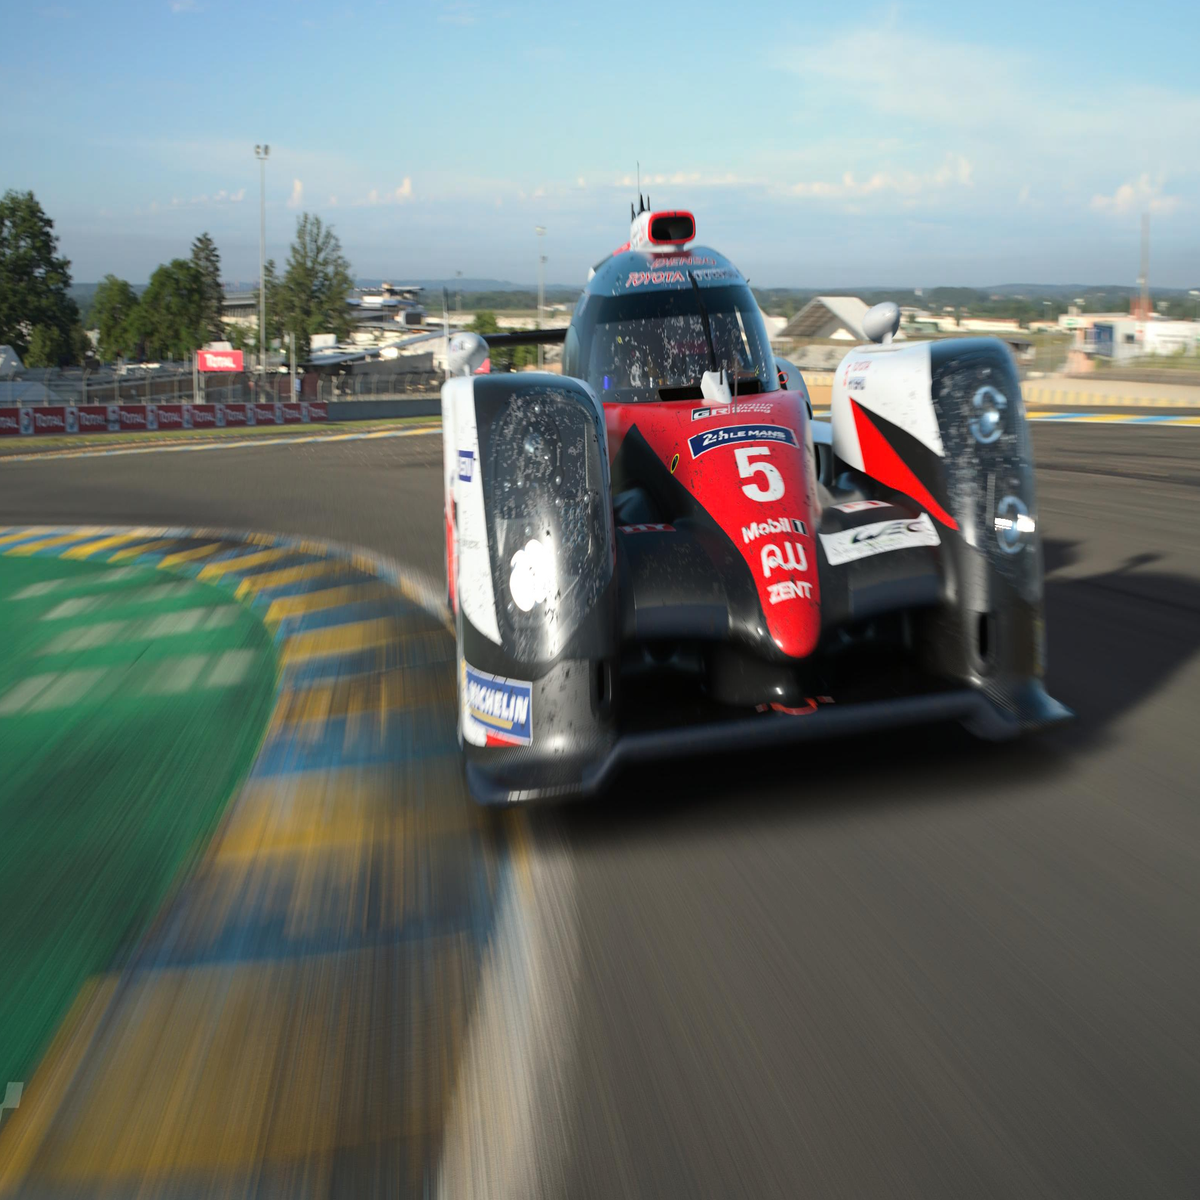 Gran Turismo 7 Arrives on the Sony PS5 - CNET